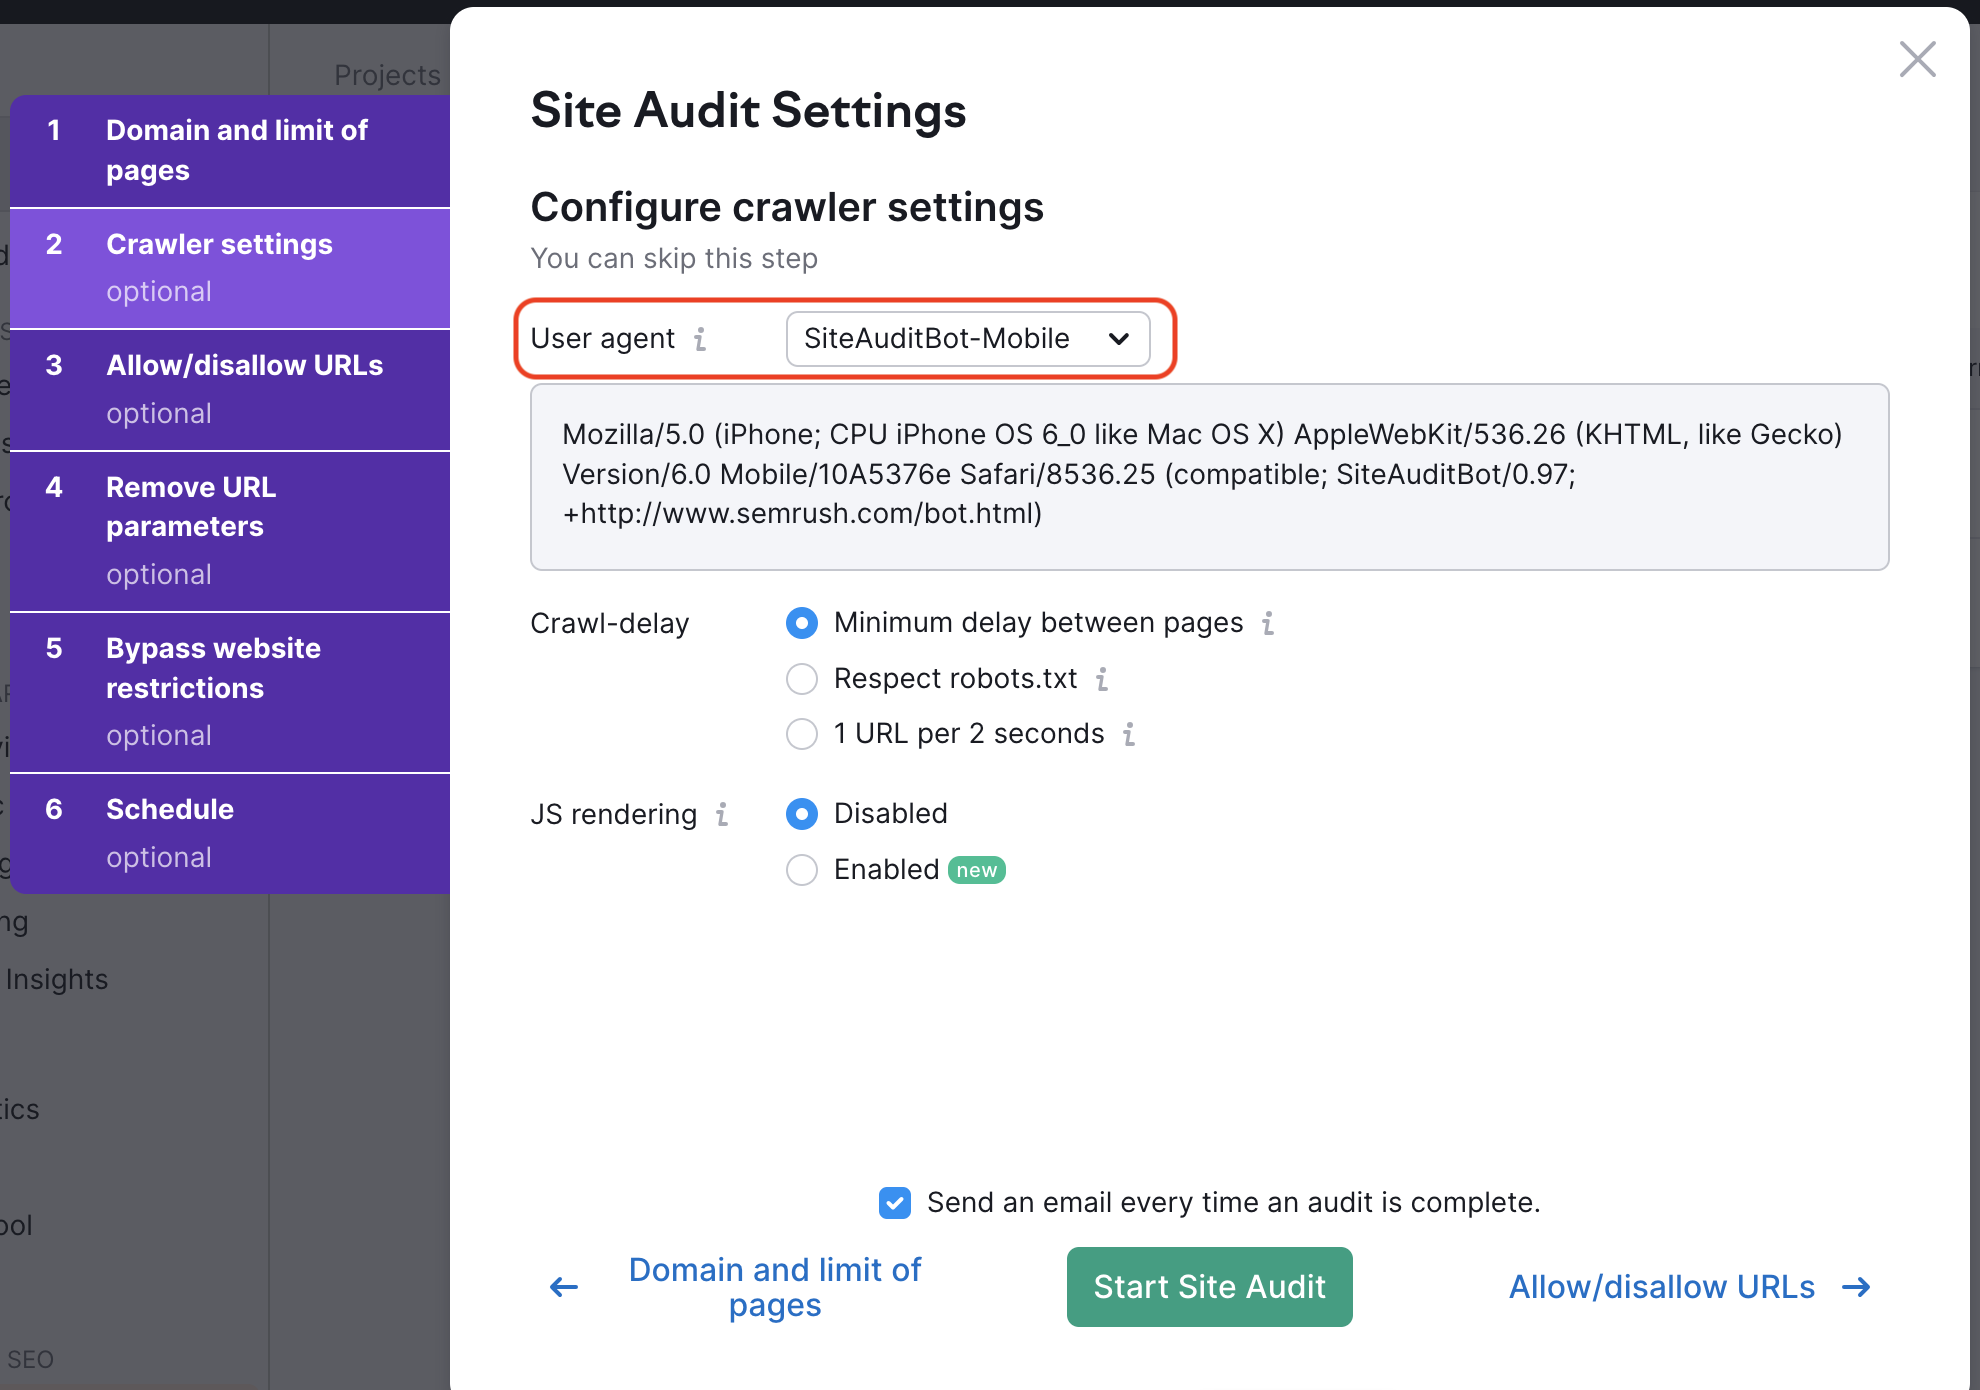 Site Audit settings menu. On the second tab, titled "Crawler settings", the User agent section is highlighted. The User agent selection has the default option enabled: SiteAuditBot-Mobile.